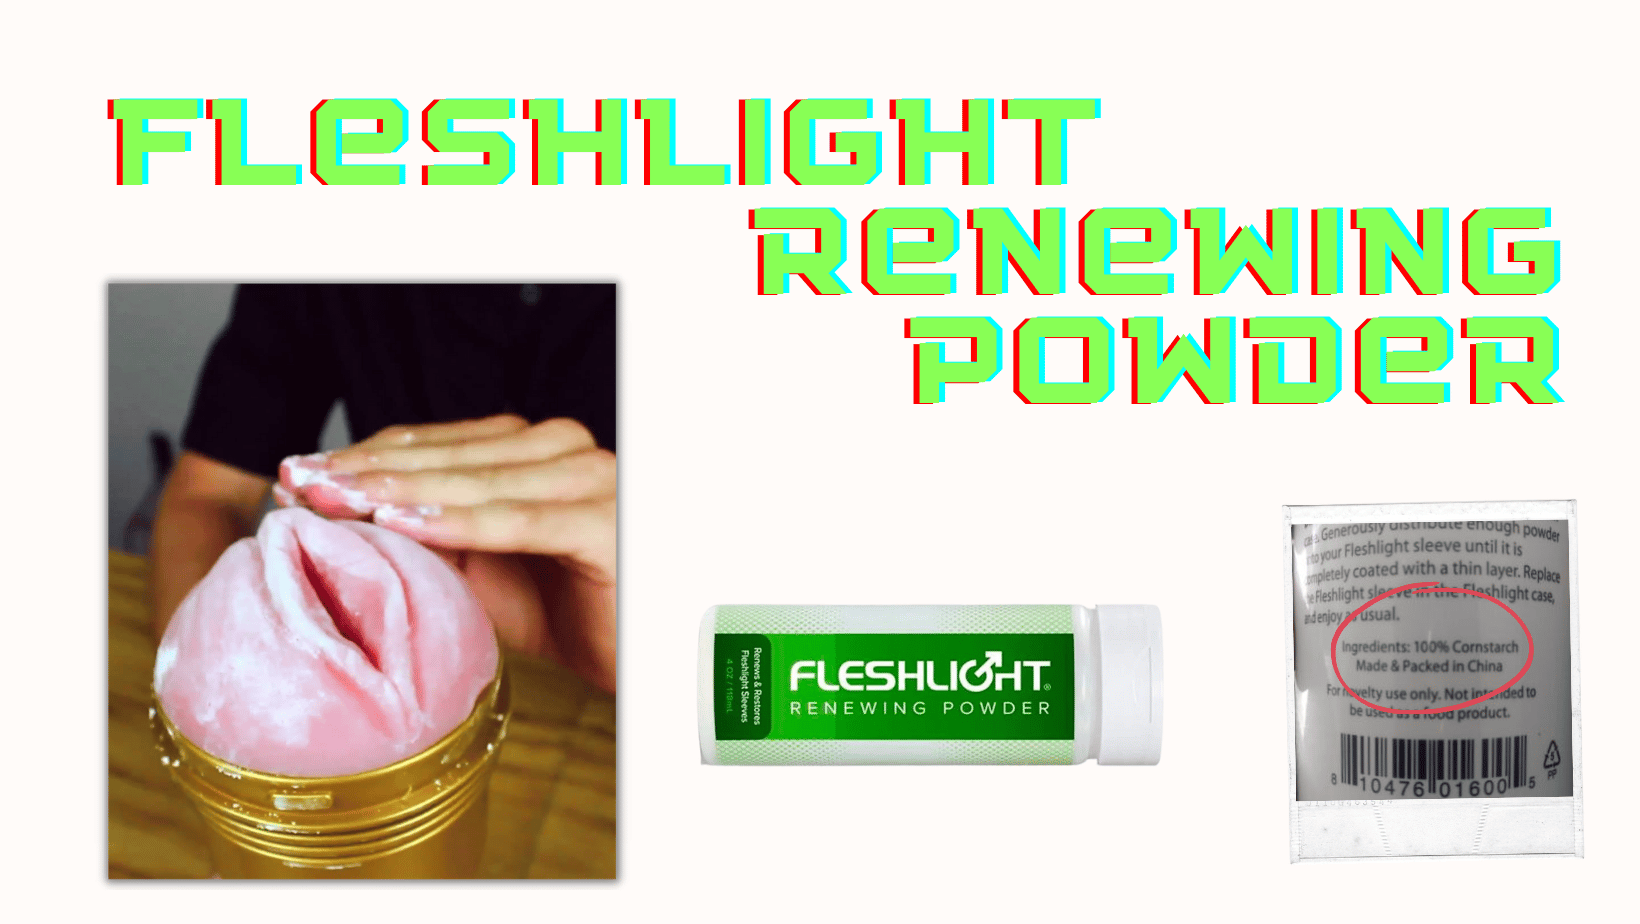 Fleshlight Renewing Powder: Is it just cornstarch? Should you use it for your Fleshlight?